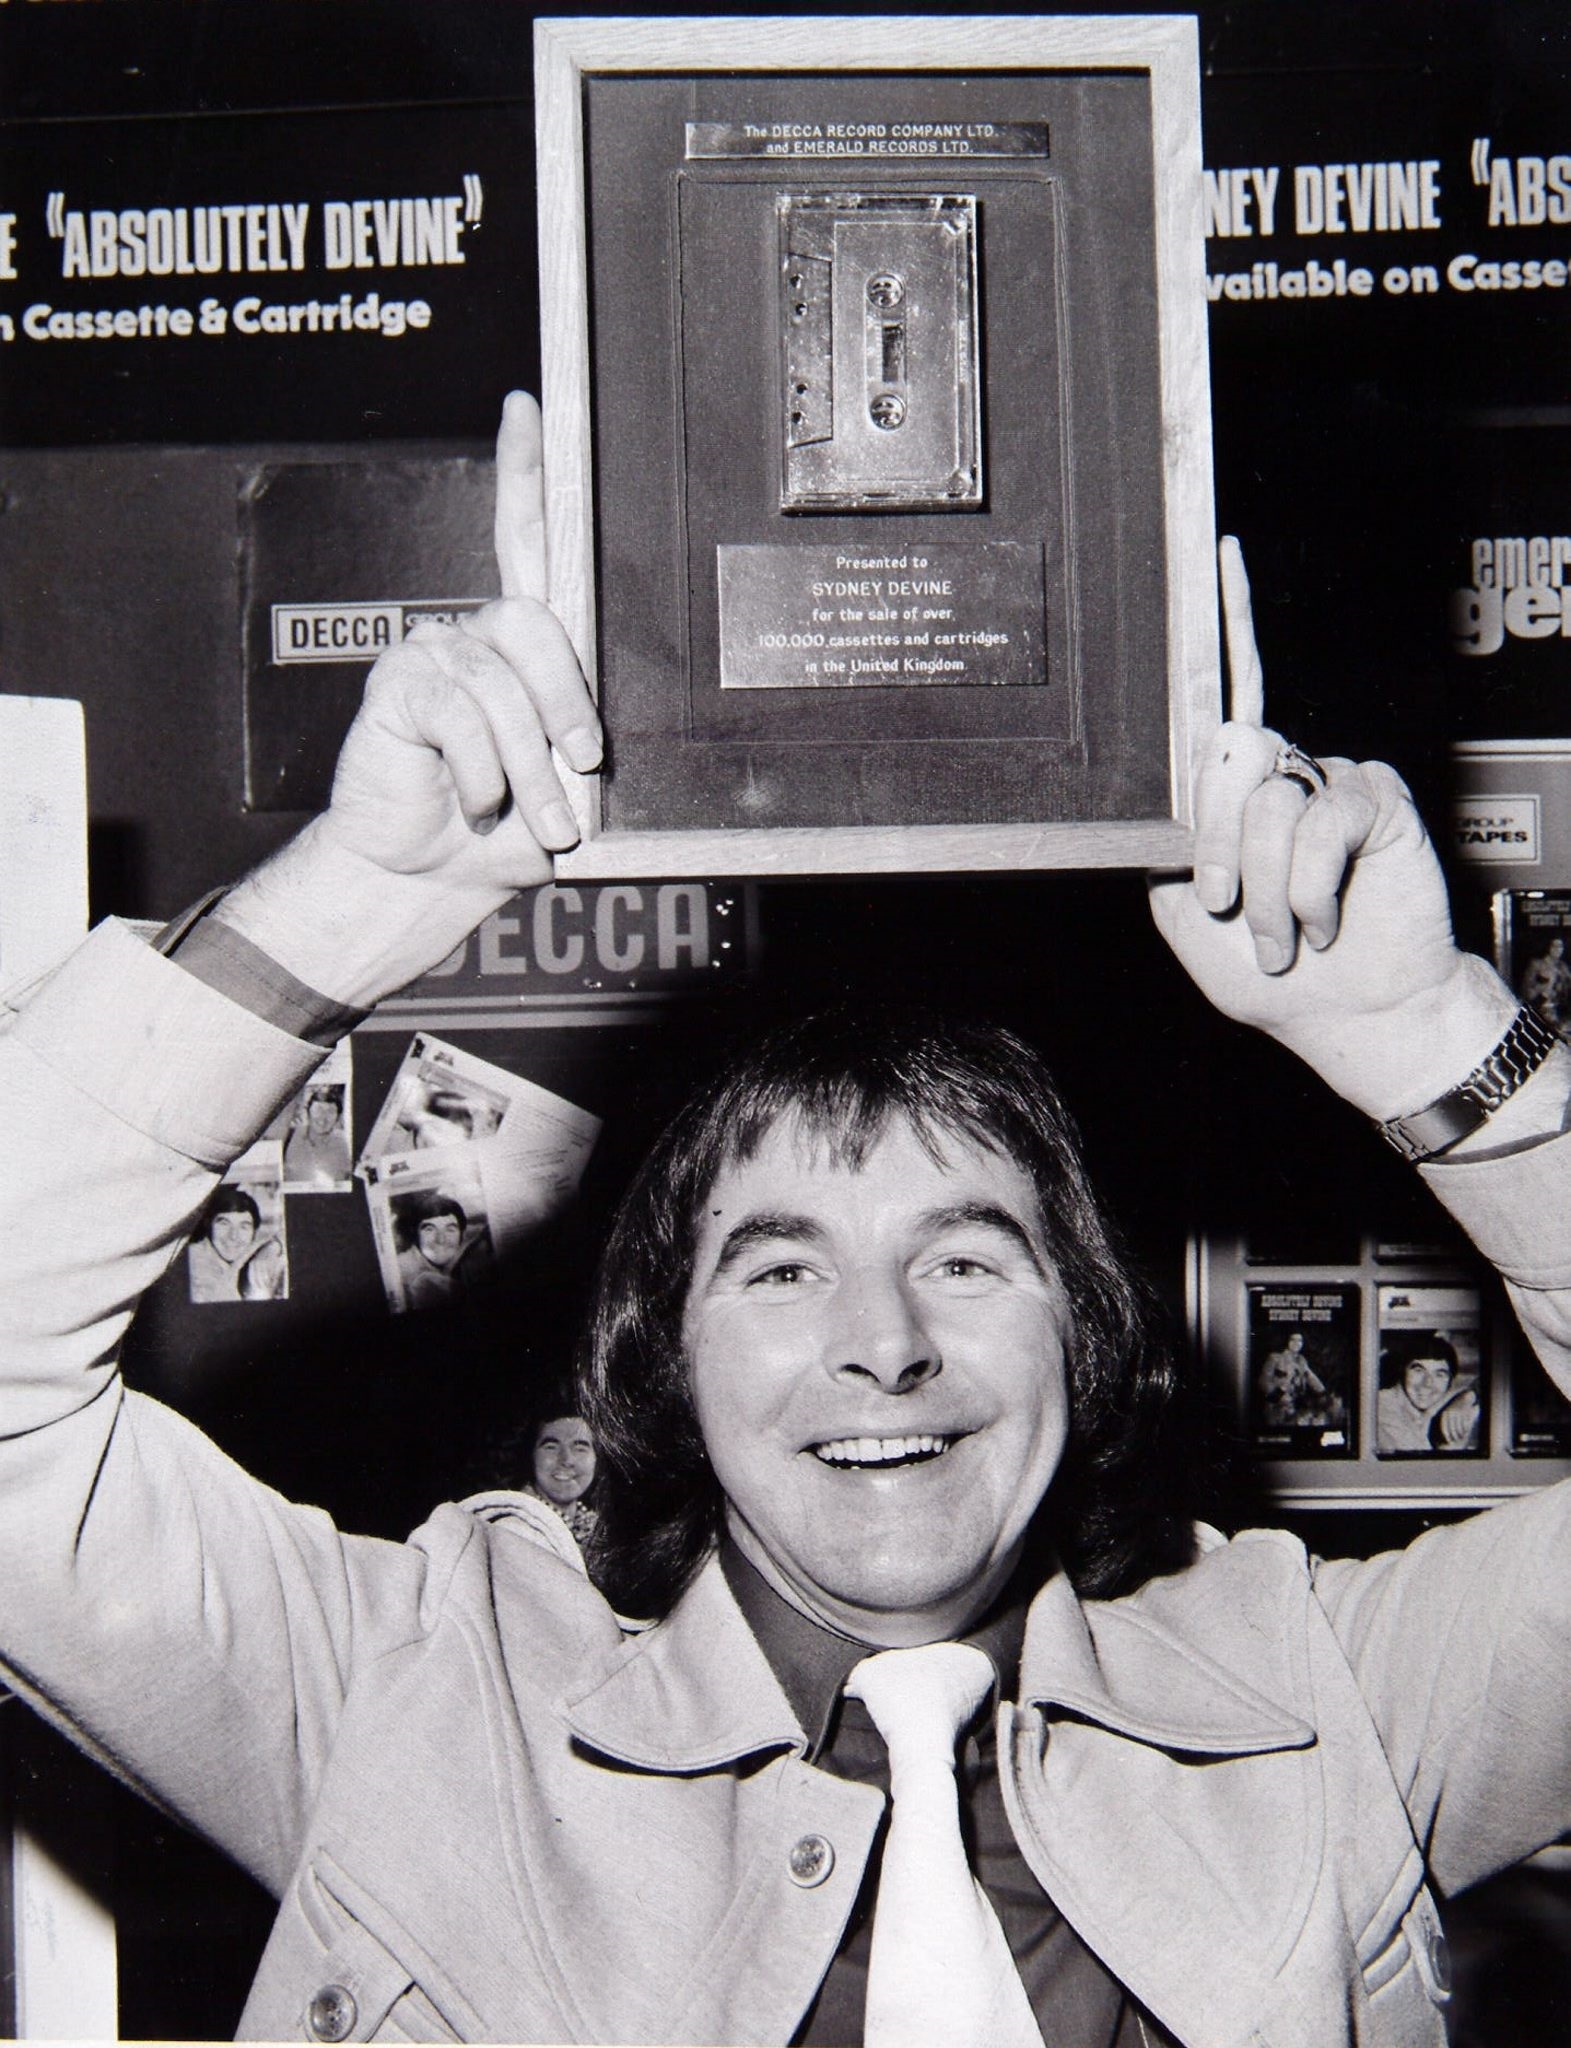 SINGER SYDNEY DEVINE WITH HIS GOLD CASSETTE. 1975. Pic: Herald and Times